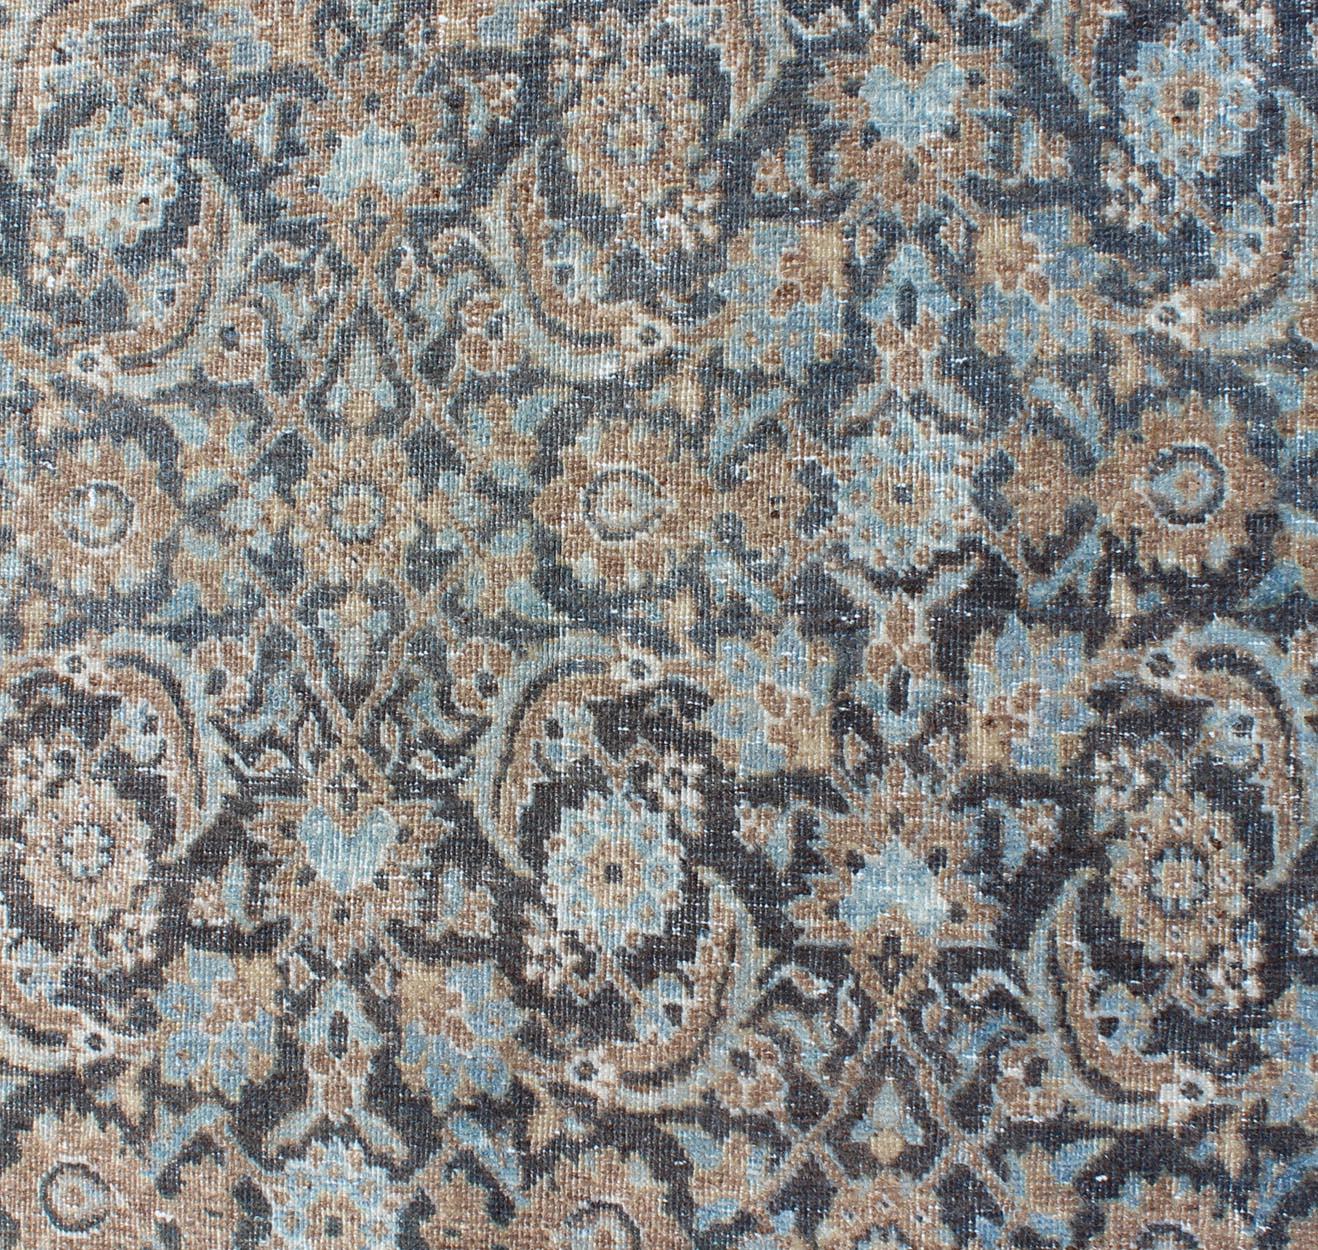 Vintage Persian Tabriz Runner with Ornate Floral Design in Blue and Taupe For Sale 2